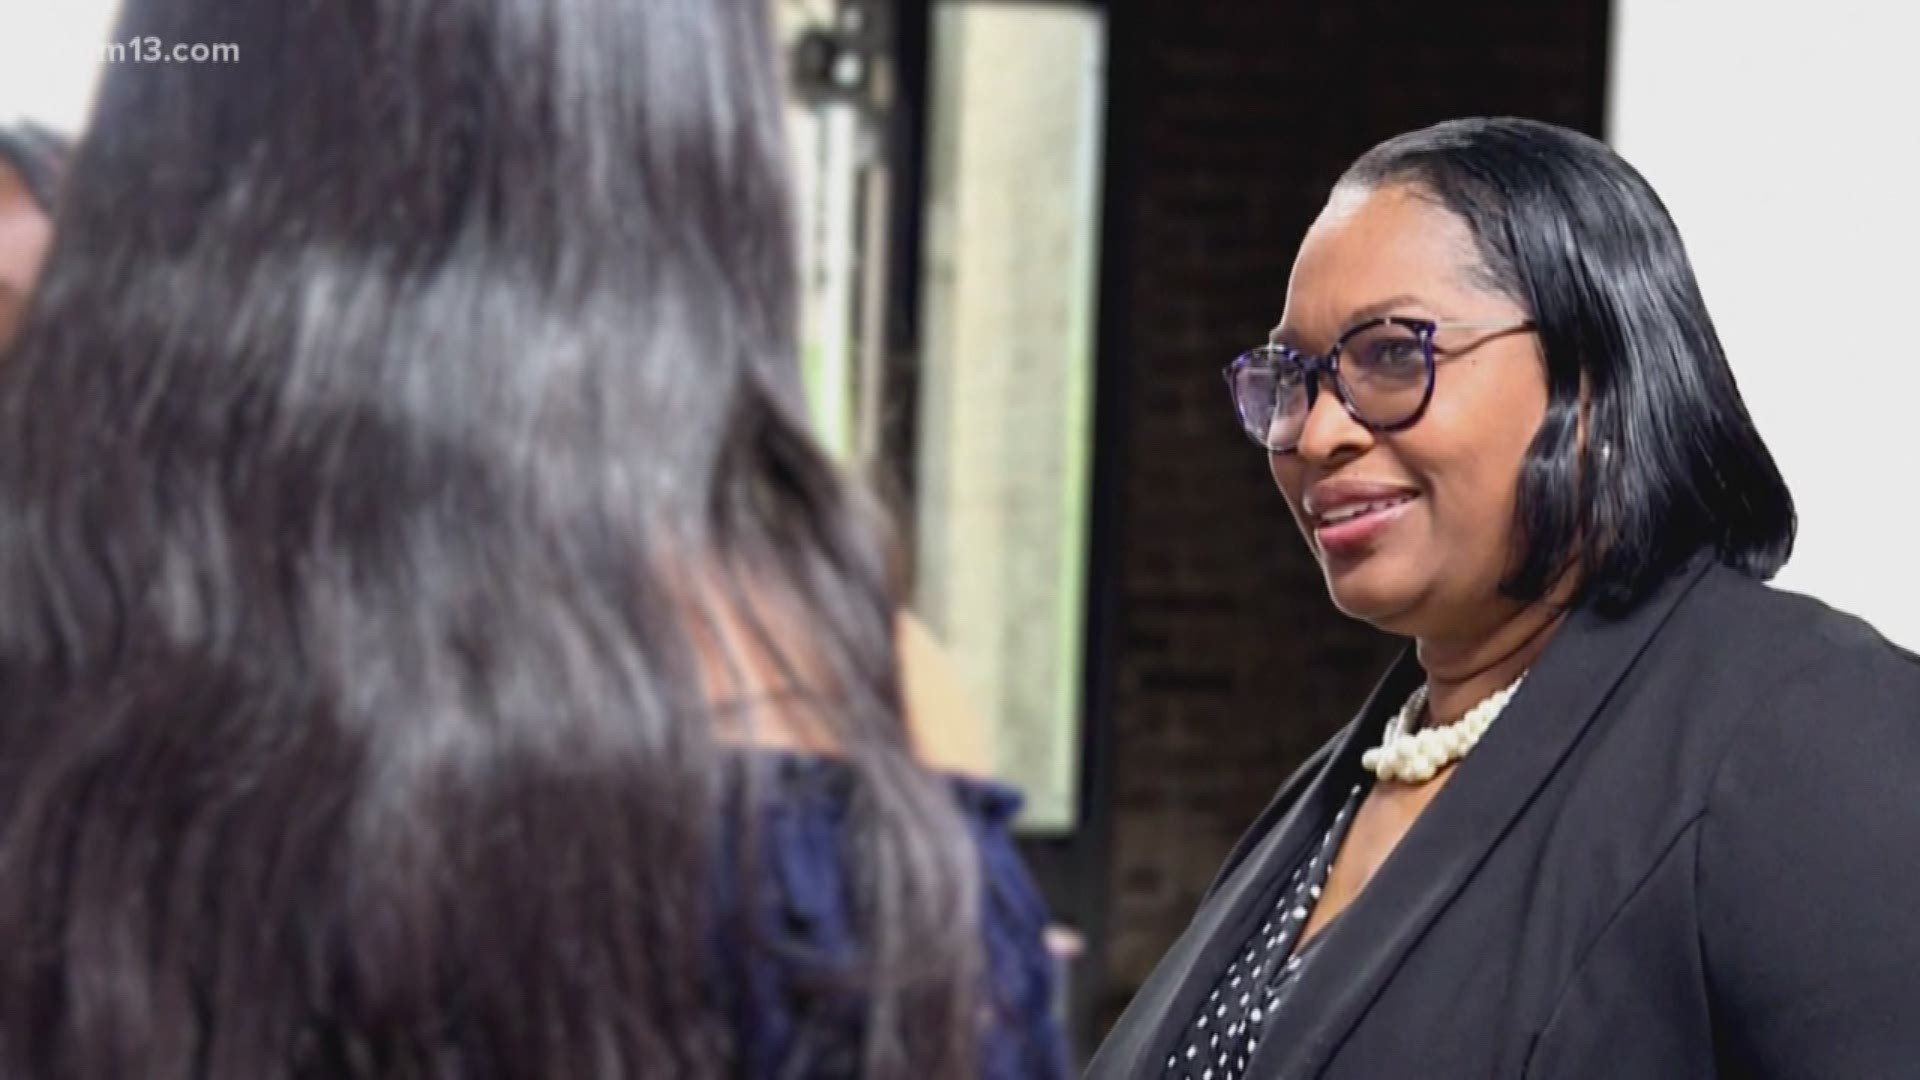 Grand Rapids Public Schools Superintendent Teresa Weatherall Neal is retiring effective June 30. 13 ON YOUR SIDE's Angela Cunningham sat down with her to look back at her time with the district and all that she's been able to accomplish.